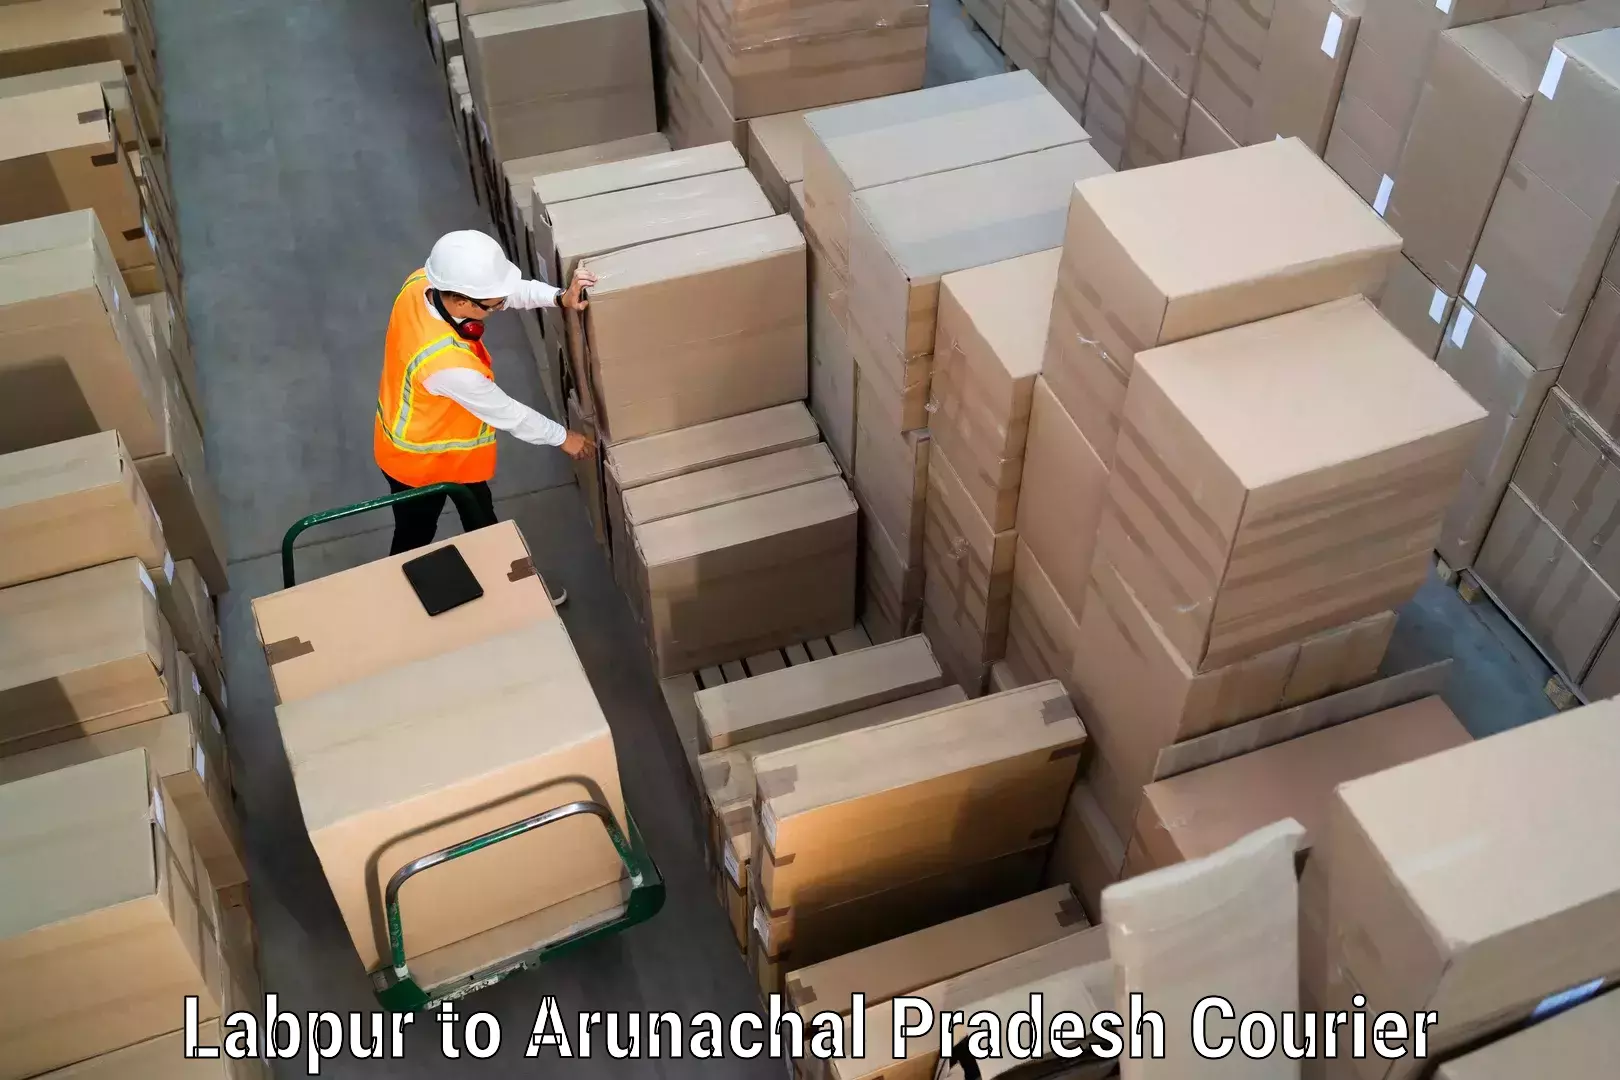 Expedited shipping methods Labpur to Deomali